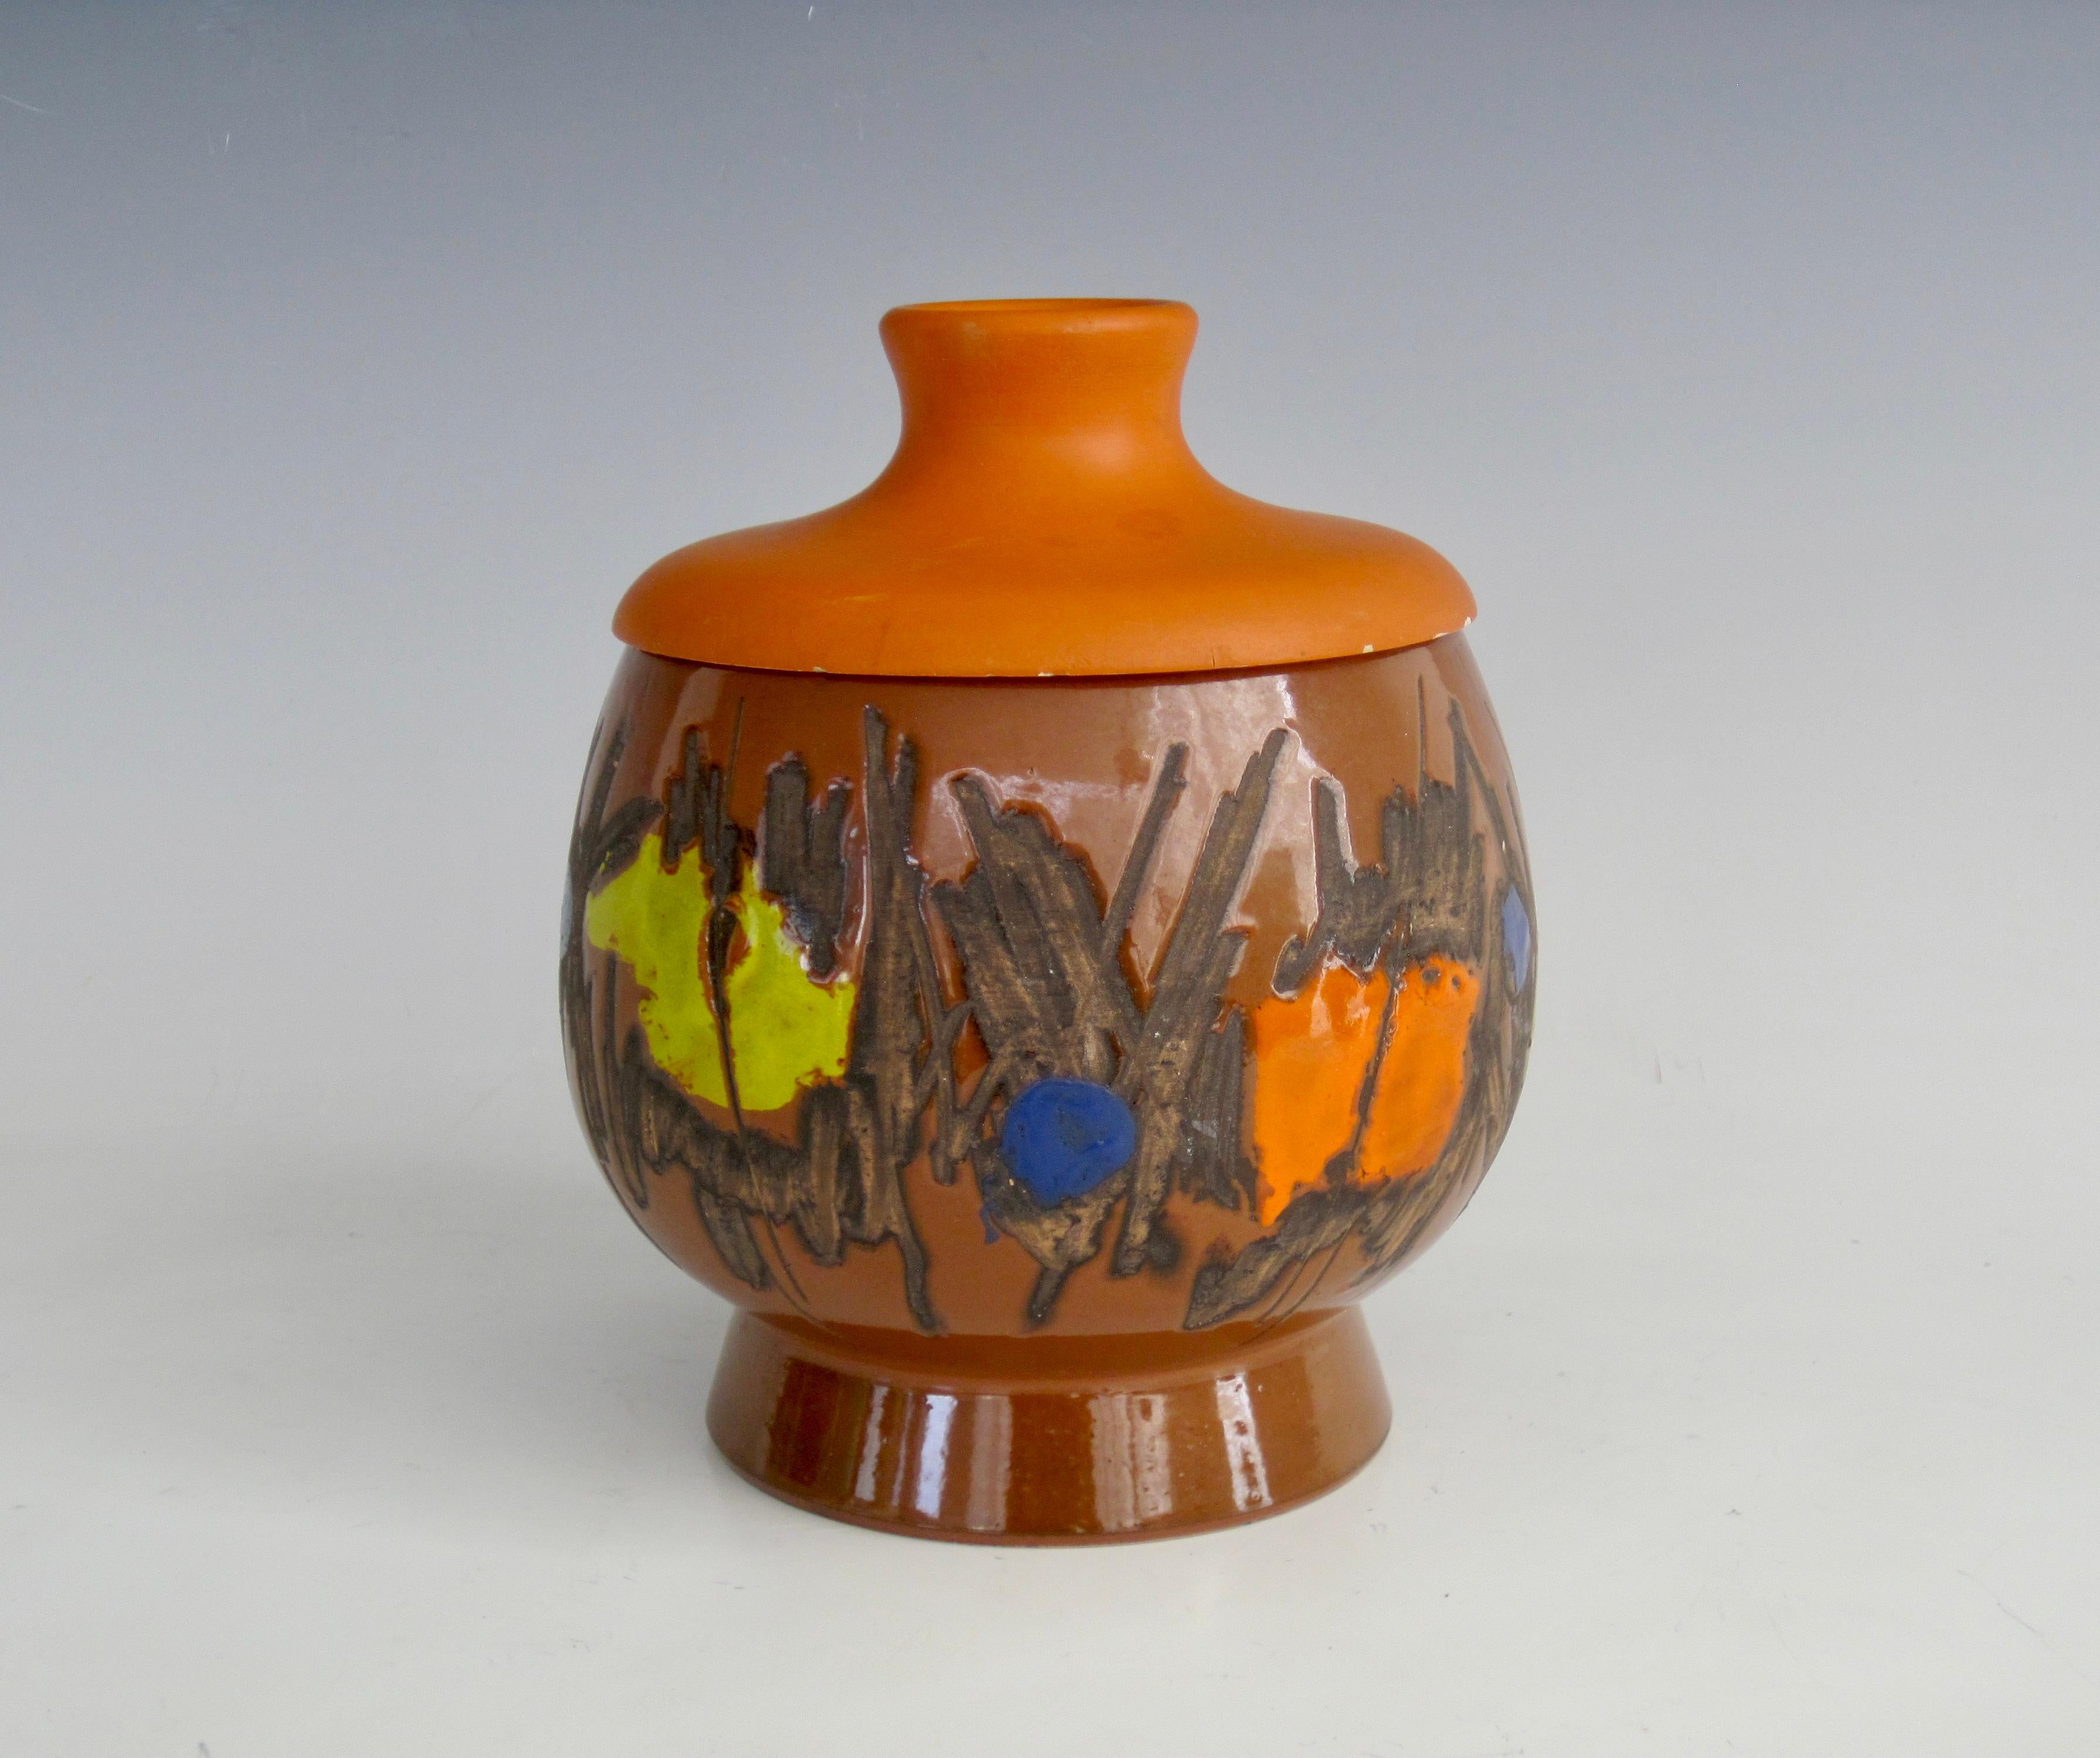 Bitossi for Raymor rare model 7549 pedestal lidded jar, in earth tones with bright pops of color and sgraffito style. The painted wooden lid has Denmark incised on underside.
Signed 7549 A Italy with Raymor label intact on underside.